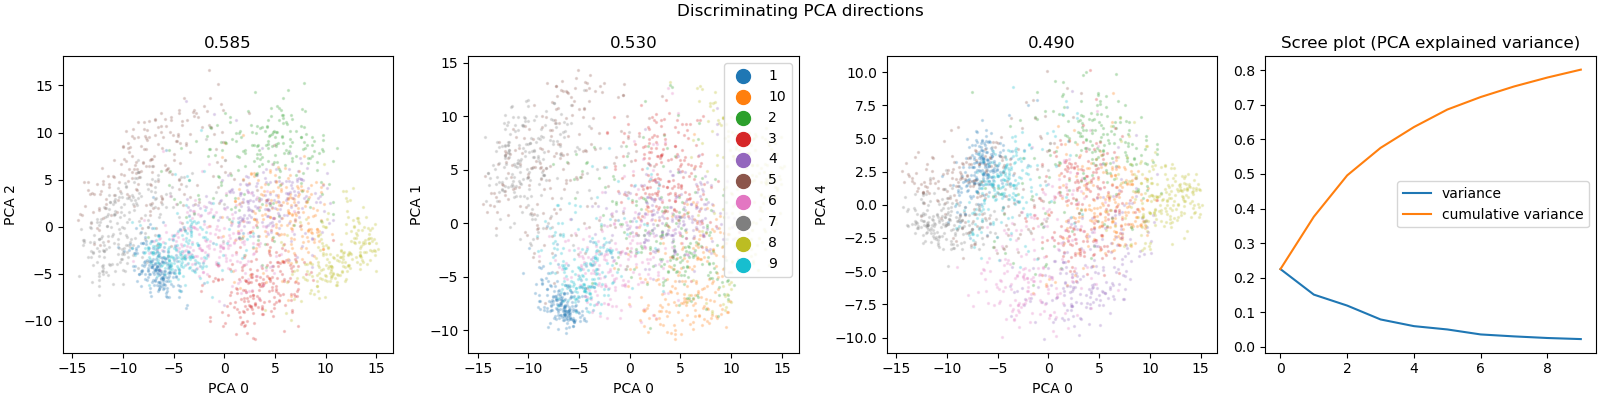 Discriminating PCA directions, 0.585, 0.530, 0.490, Scree plot (PCA explained variance)